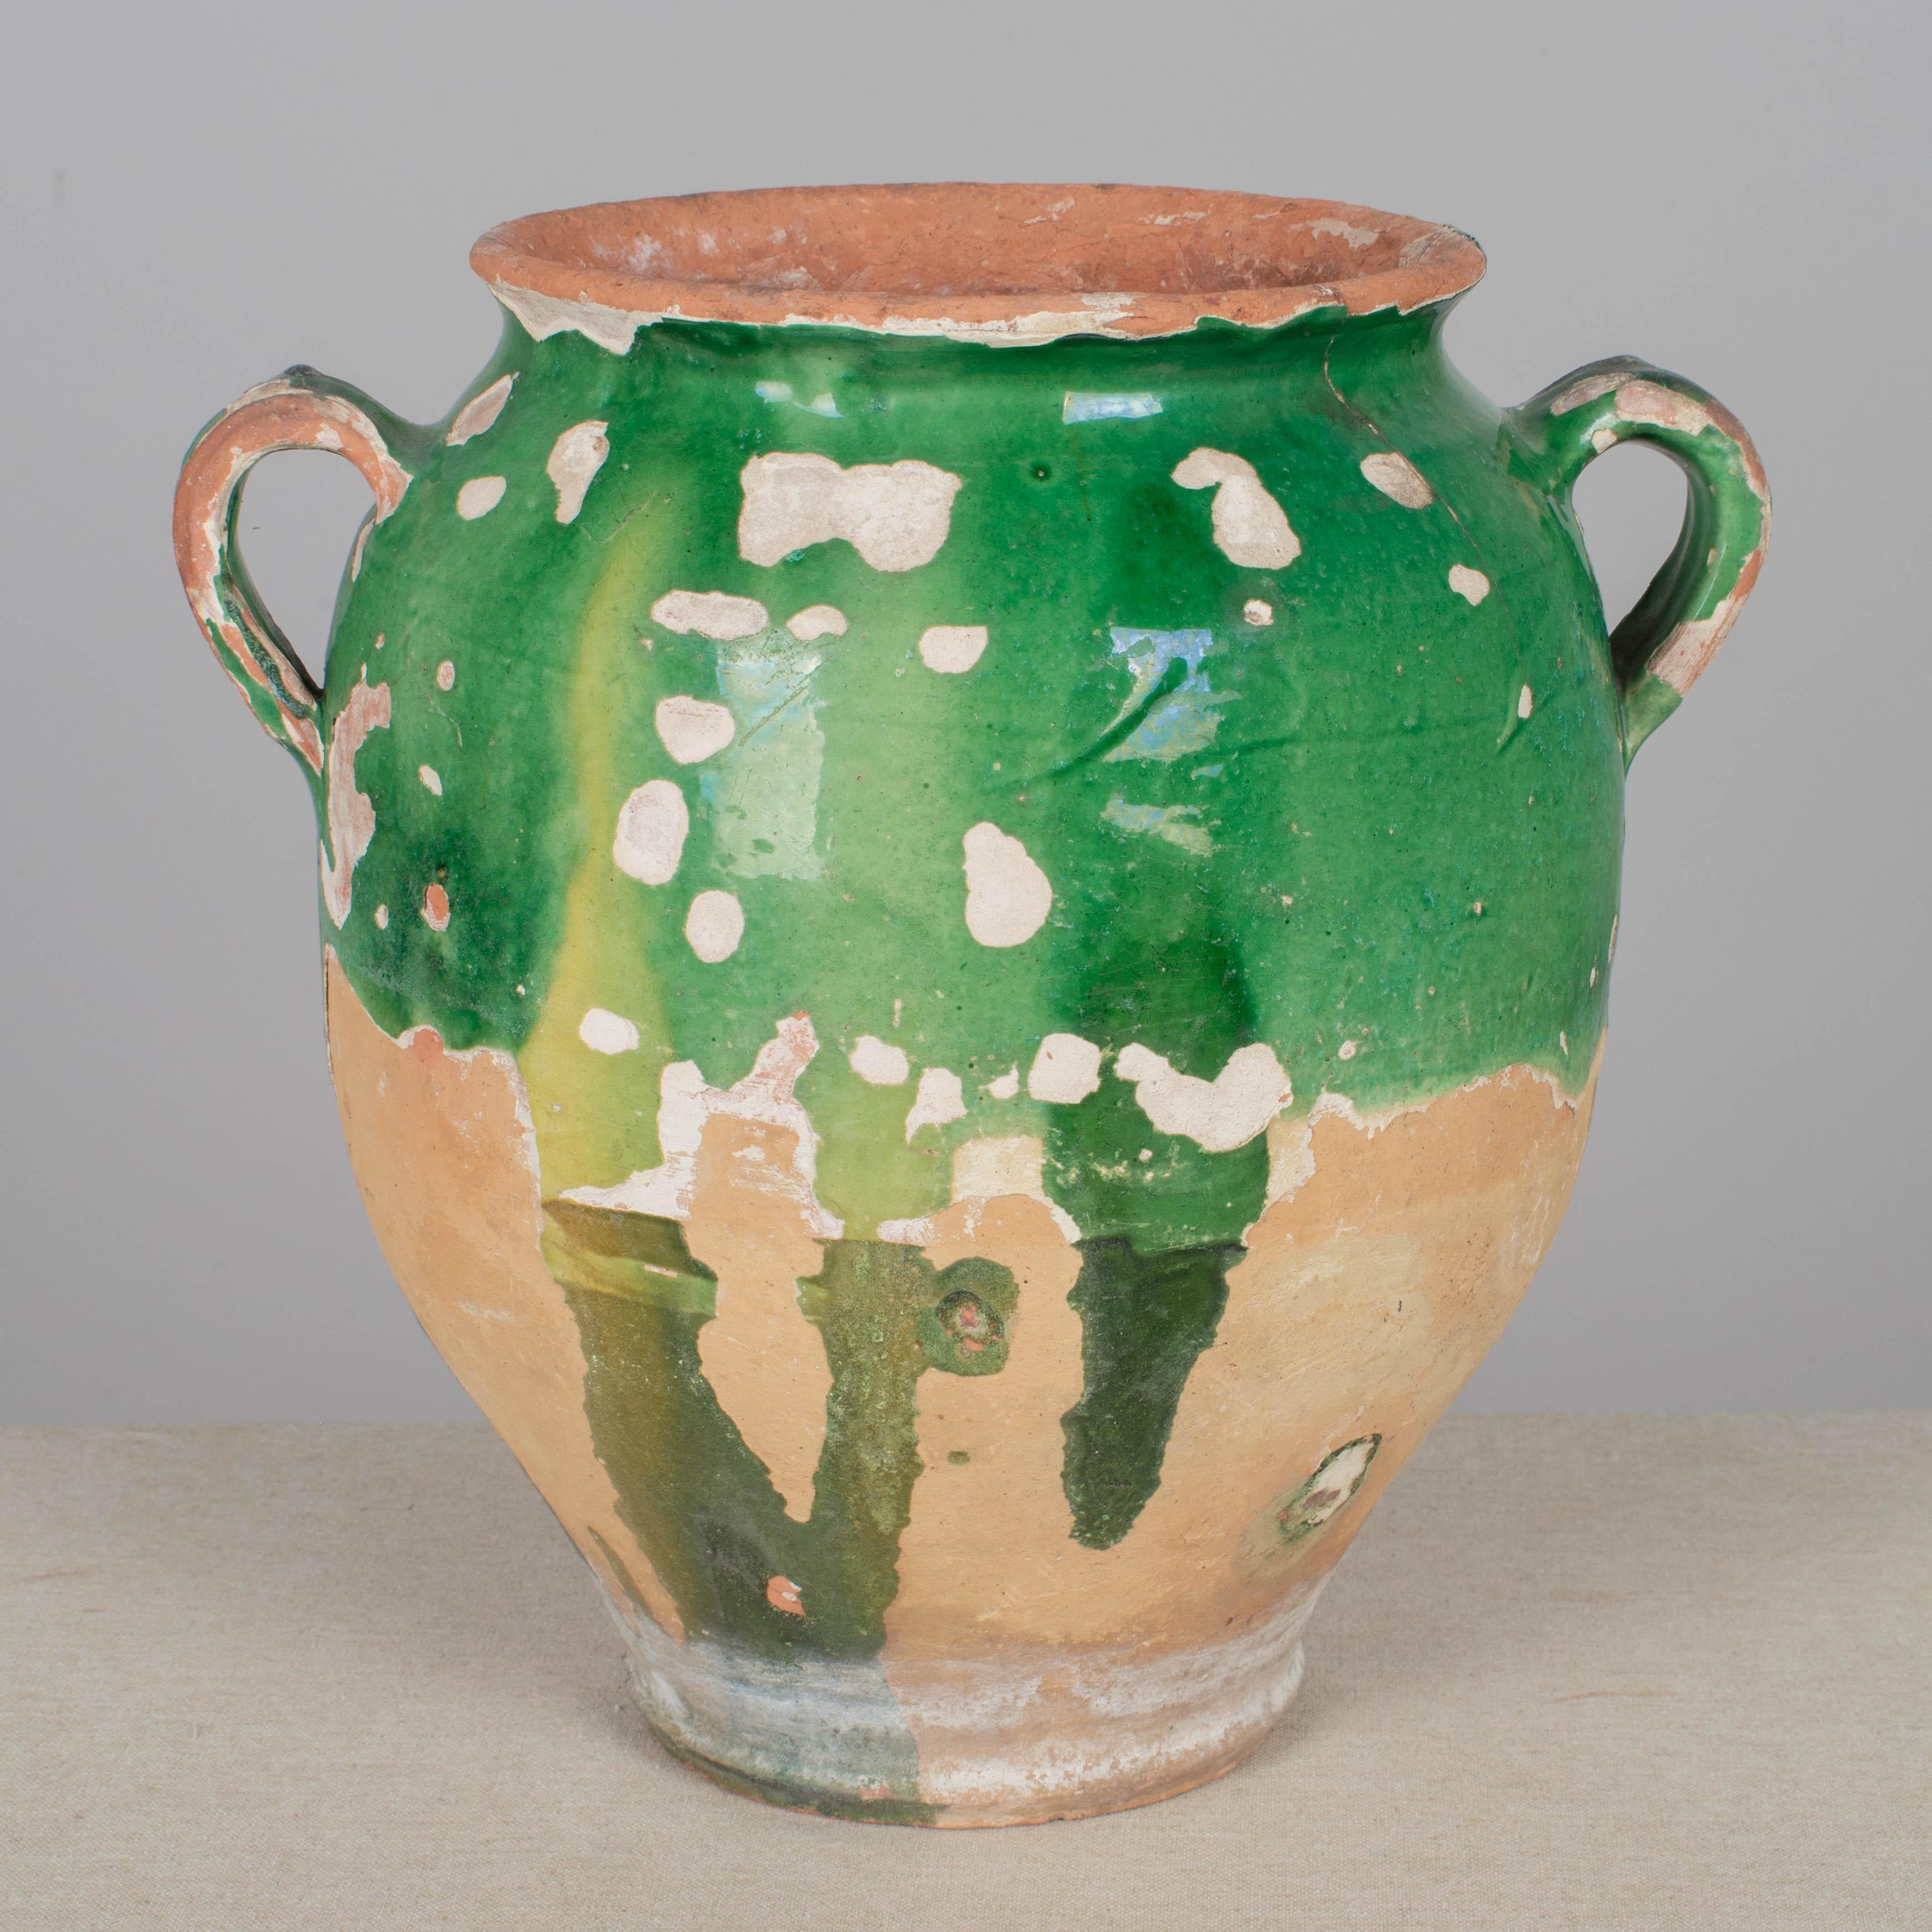 A French earthenware confit pot with traditional green glaze. These ordinary earthenware vessels were once used daily in the French country home and have beautiful rustic glazes of green, ochre and terracotta. Nice decorative elements especially